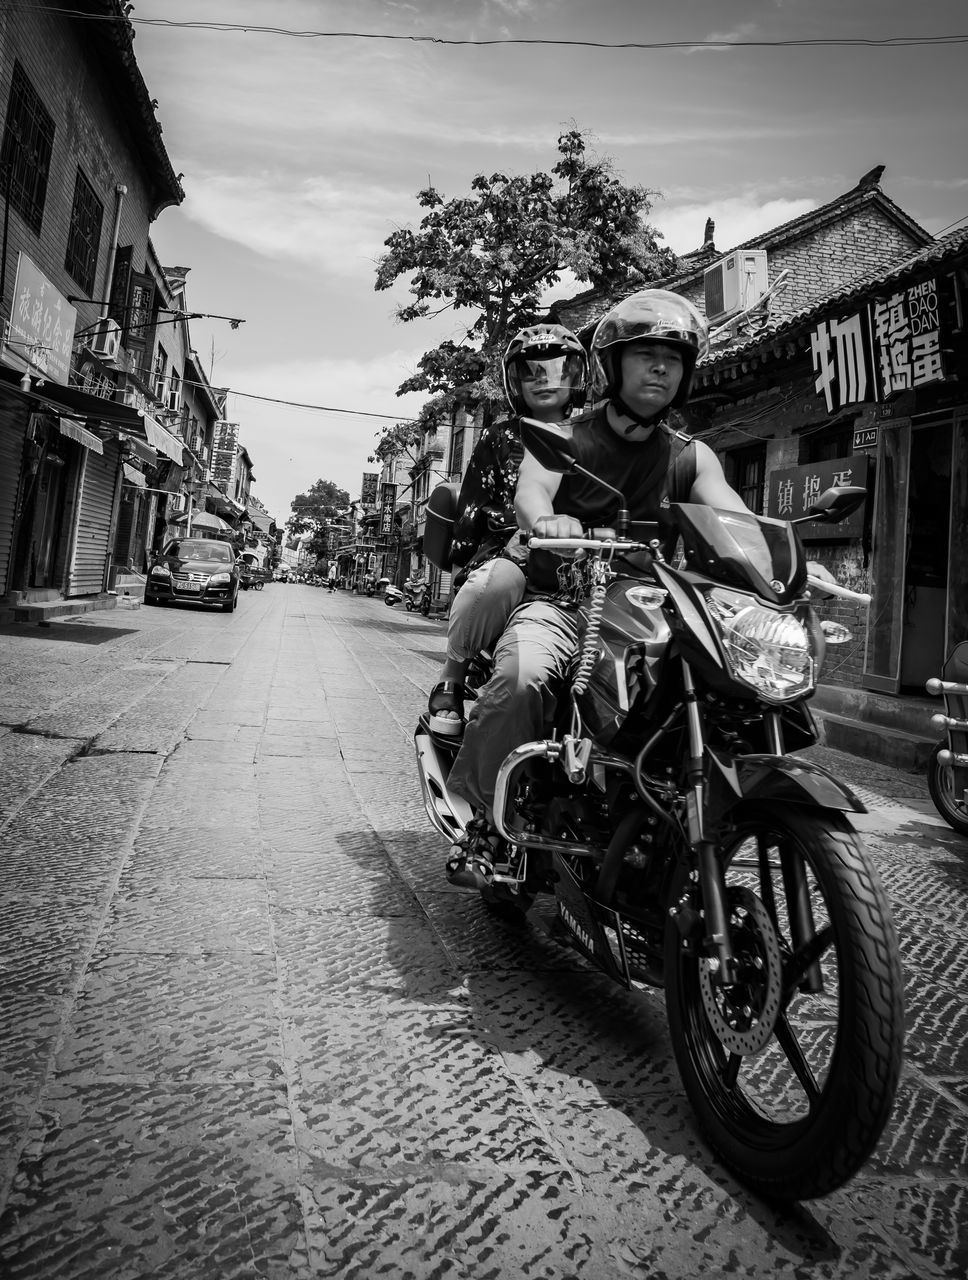 transportation, building exterior, mode of transportation, architecture, one person, real people, portrait, city, street, built structure, motorcycle, lifestyles, looking at camera, ride, land vehicle, riding, sky, leisure activity, full length, outdoors